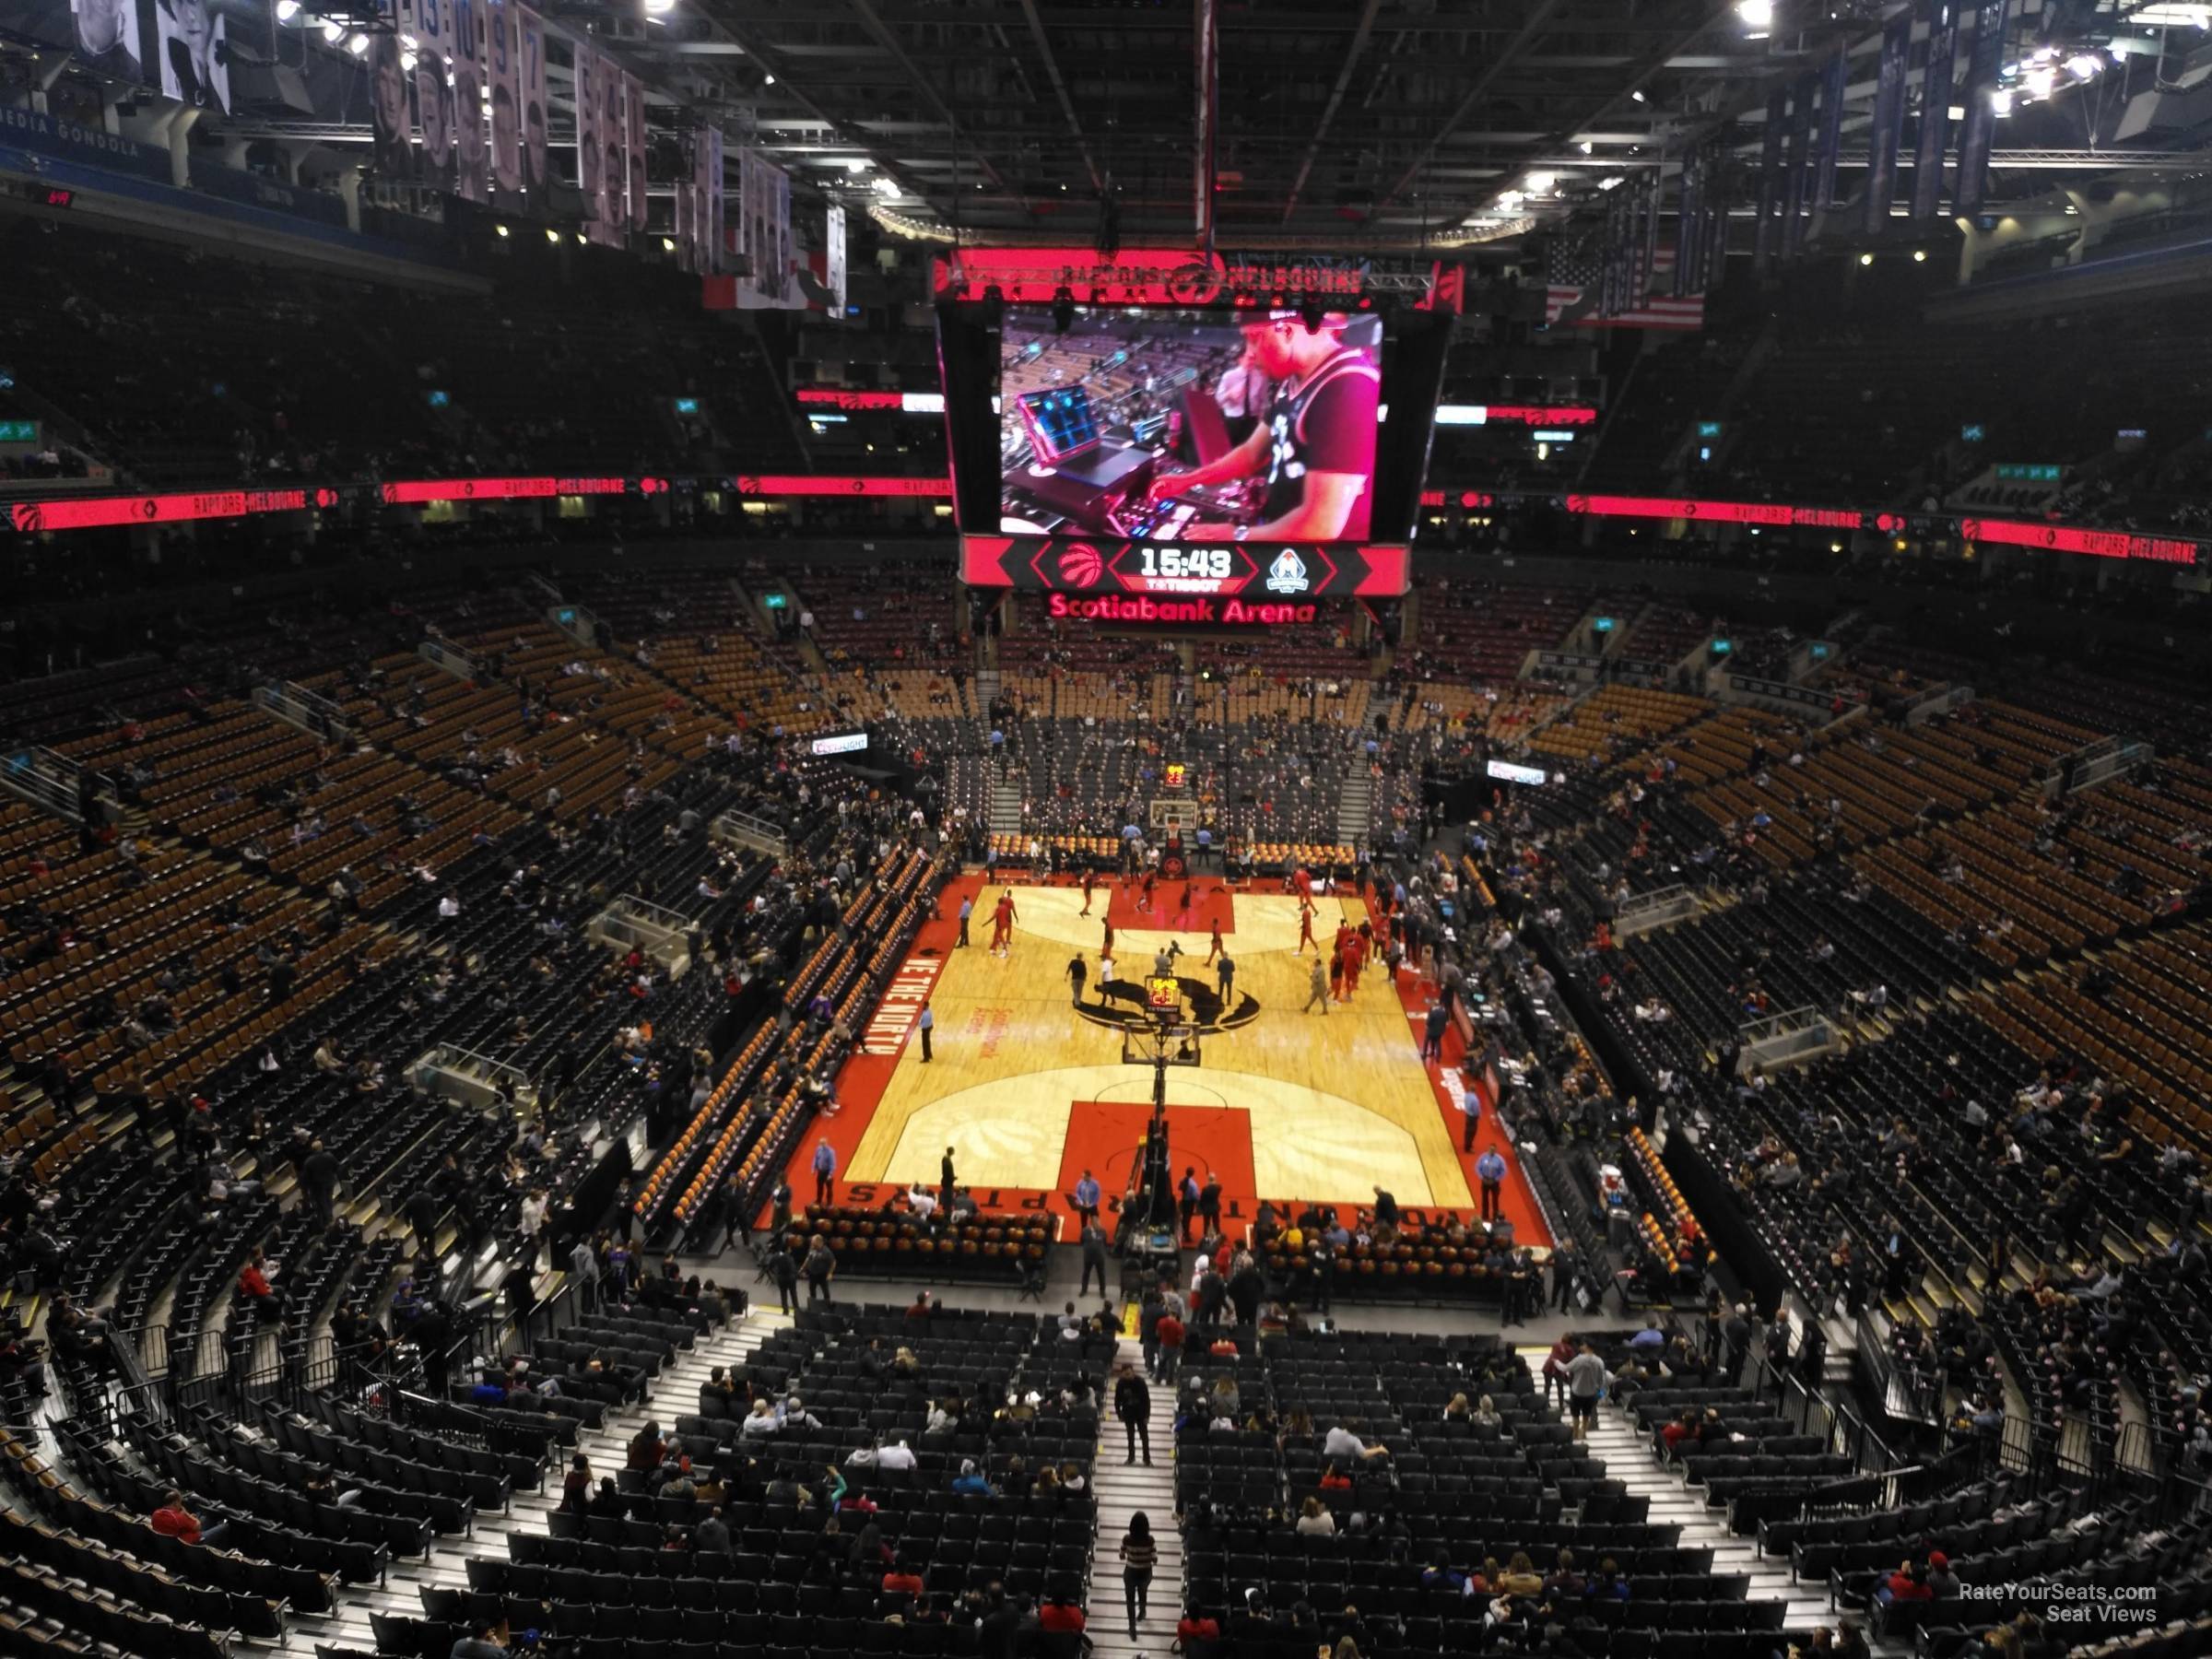 section 303, row 3 seat view  for basketball - scotiabank arena